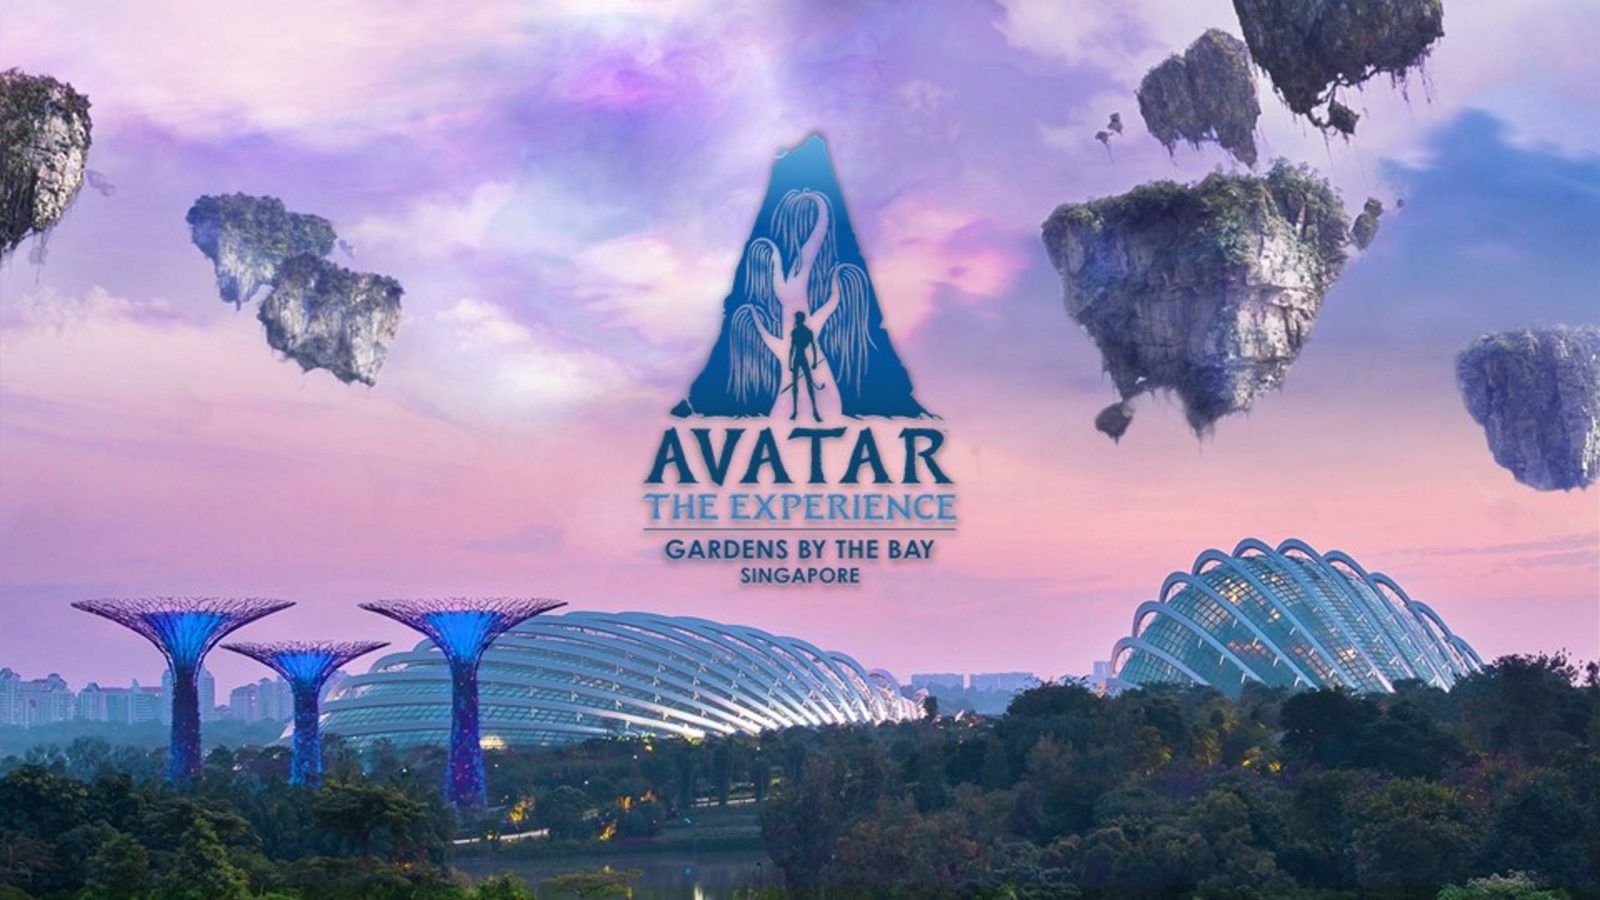 The Official Site of Avatar The Experience